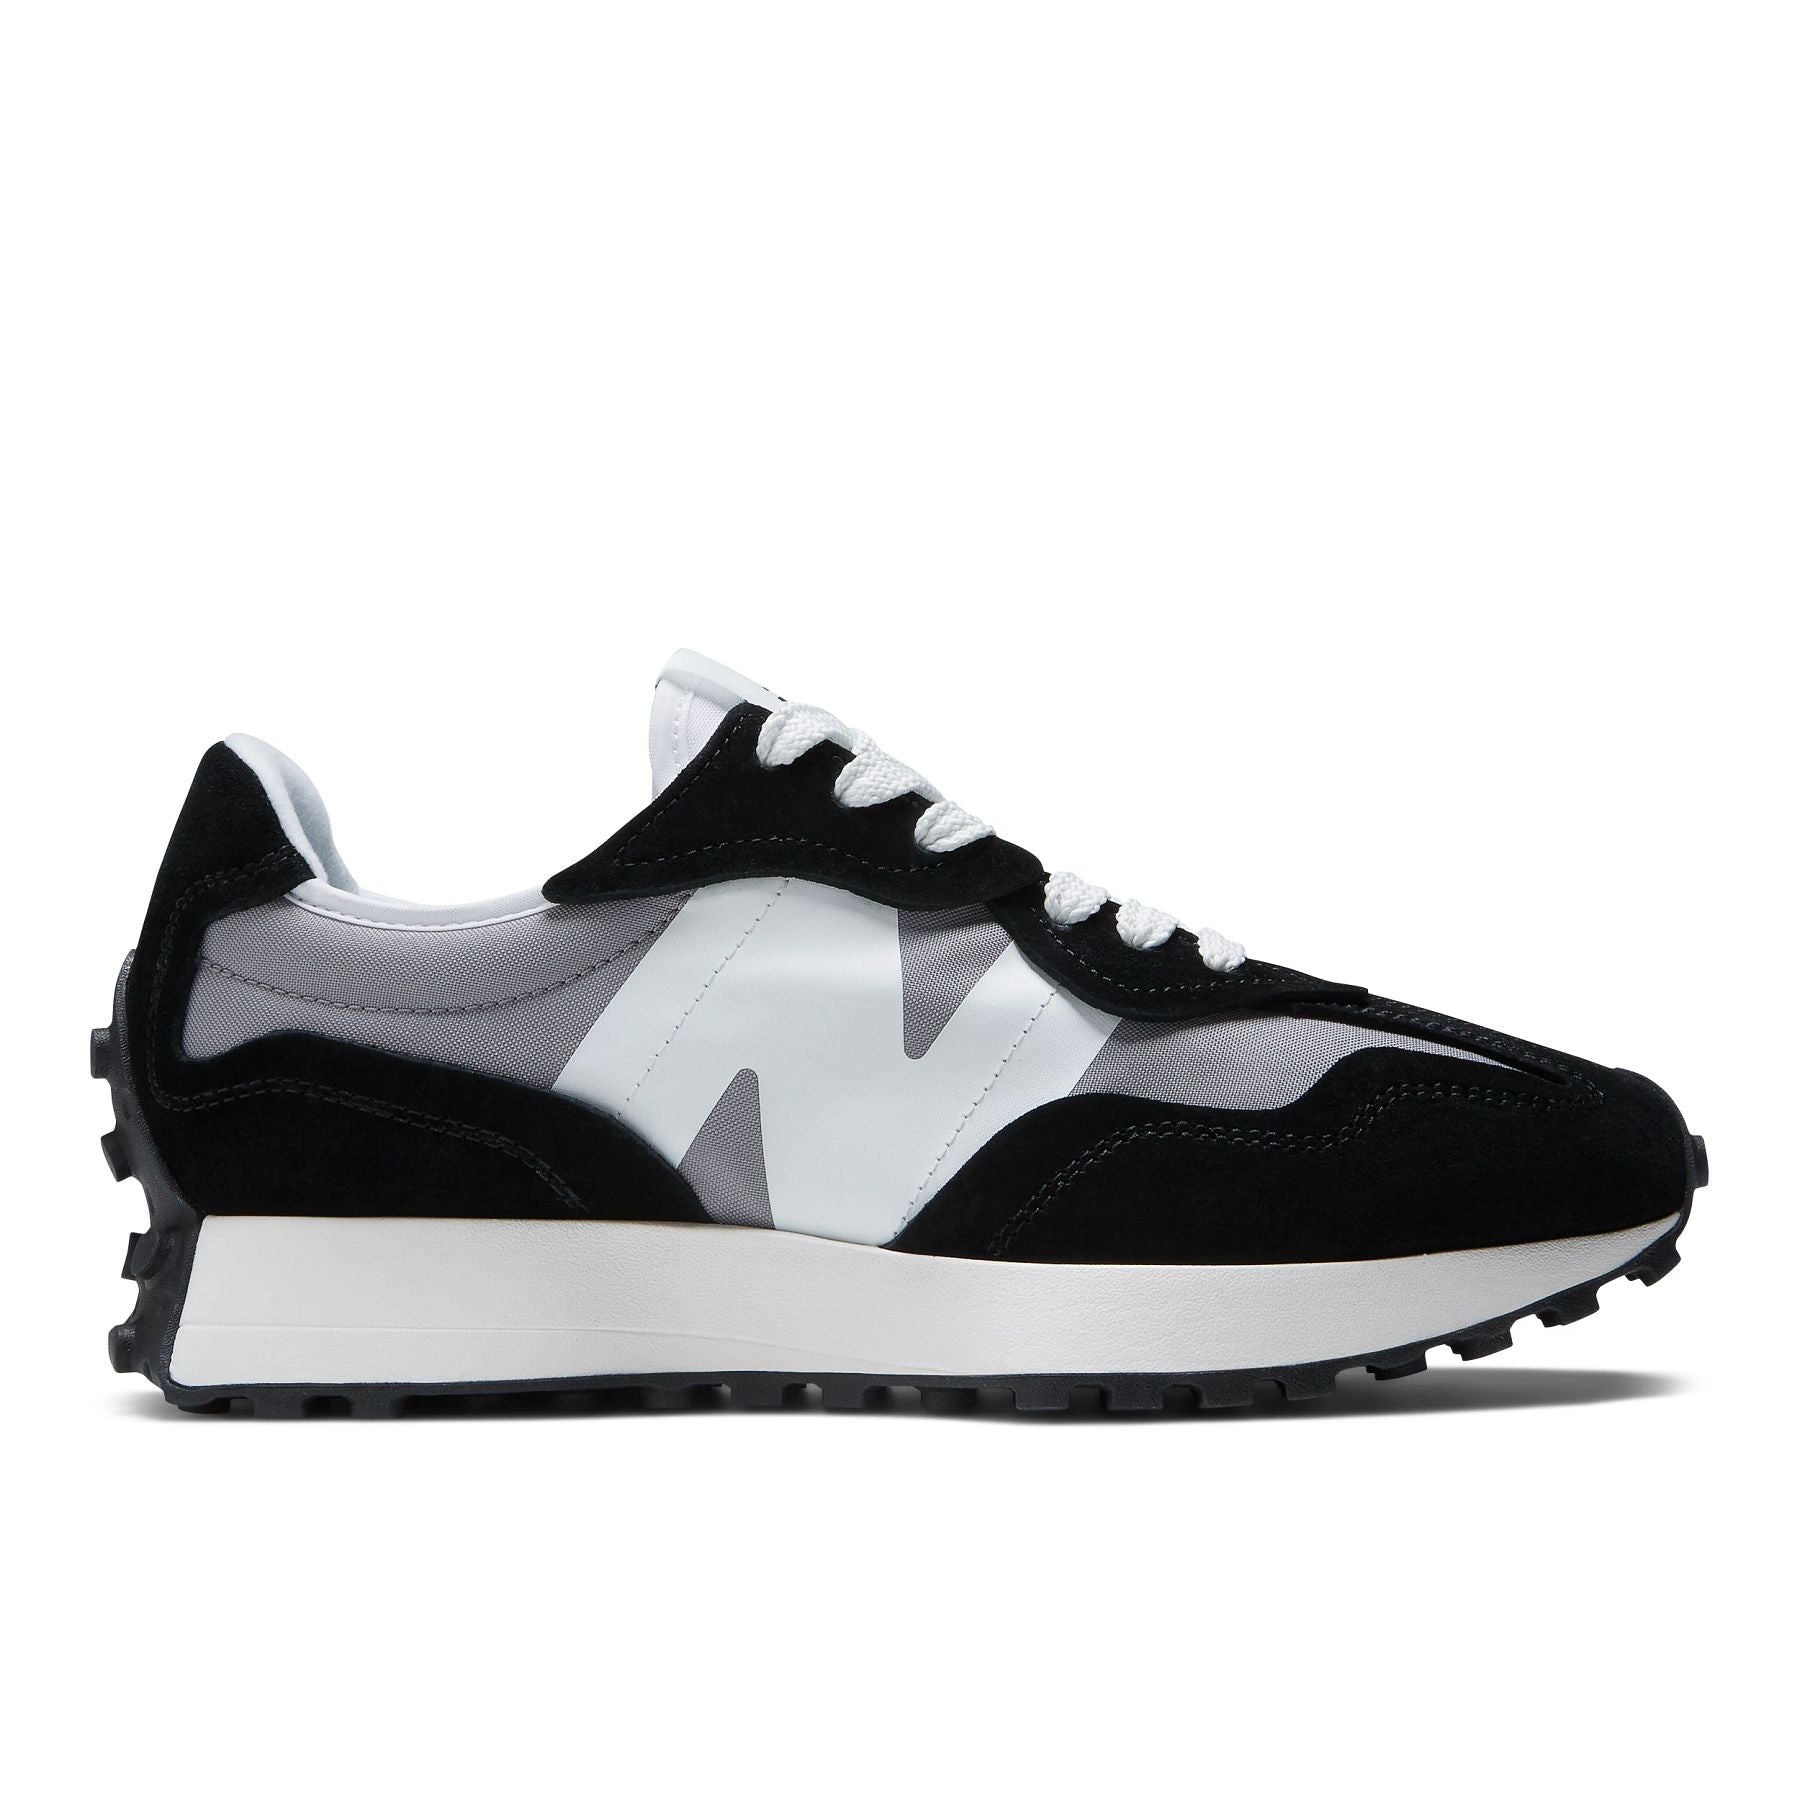 Lateral view of the Men's New Balance 327 lifestyle shoe in Black/Grey